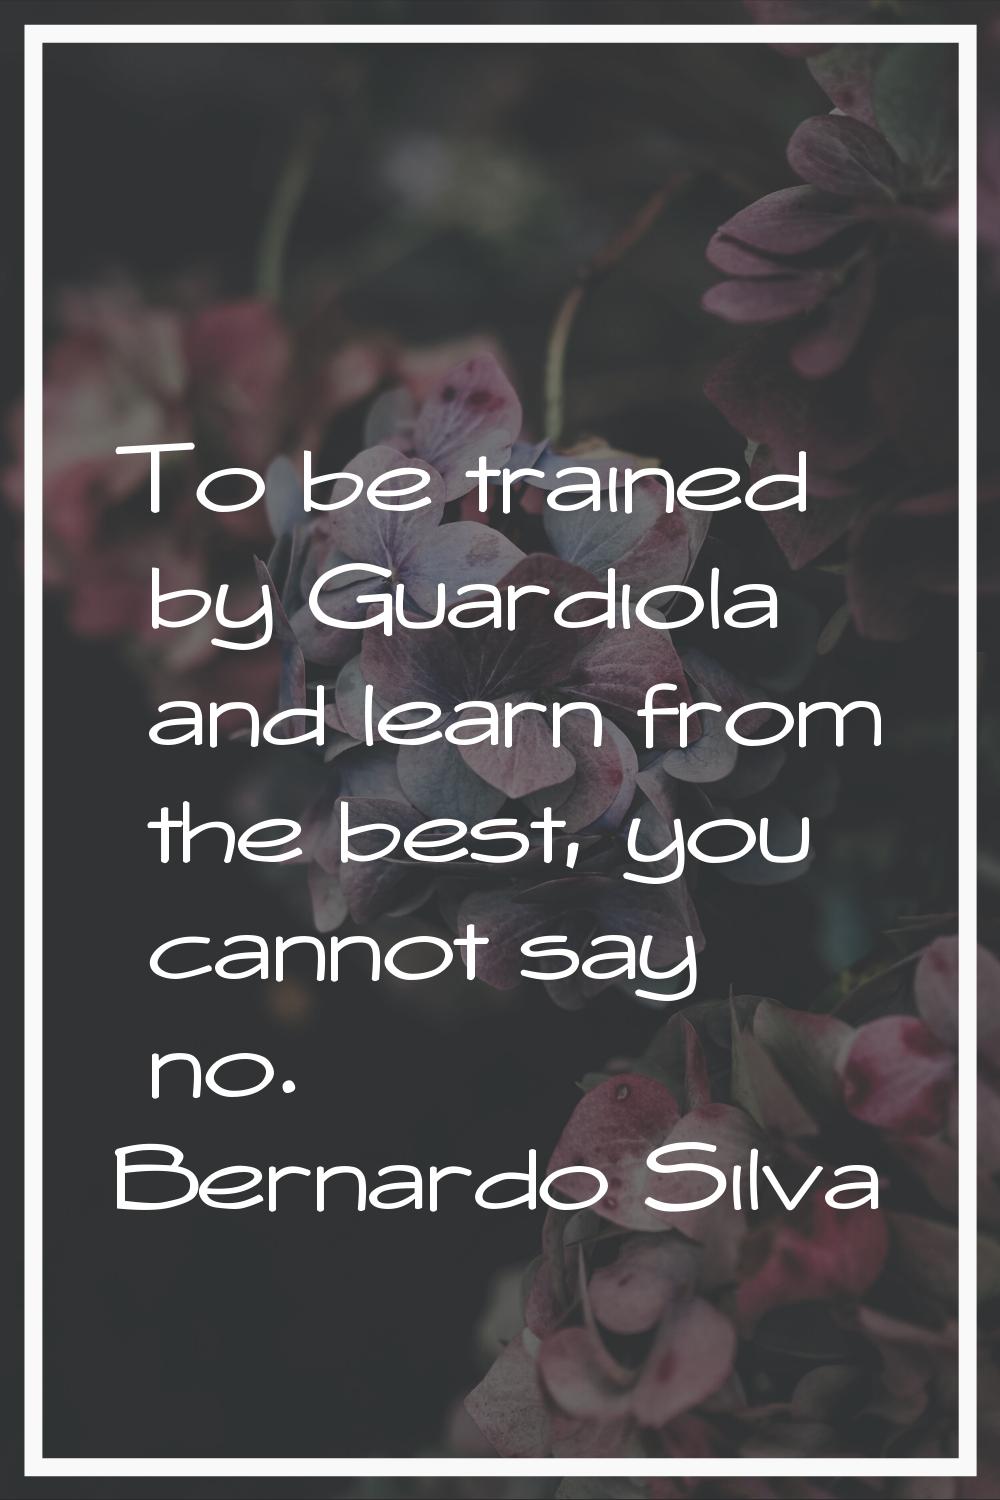 To be trained by Guardiola and learn from the best, you cannot say no.